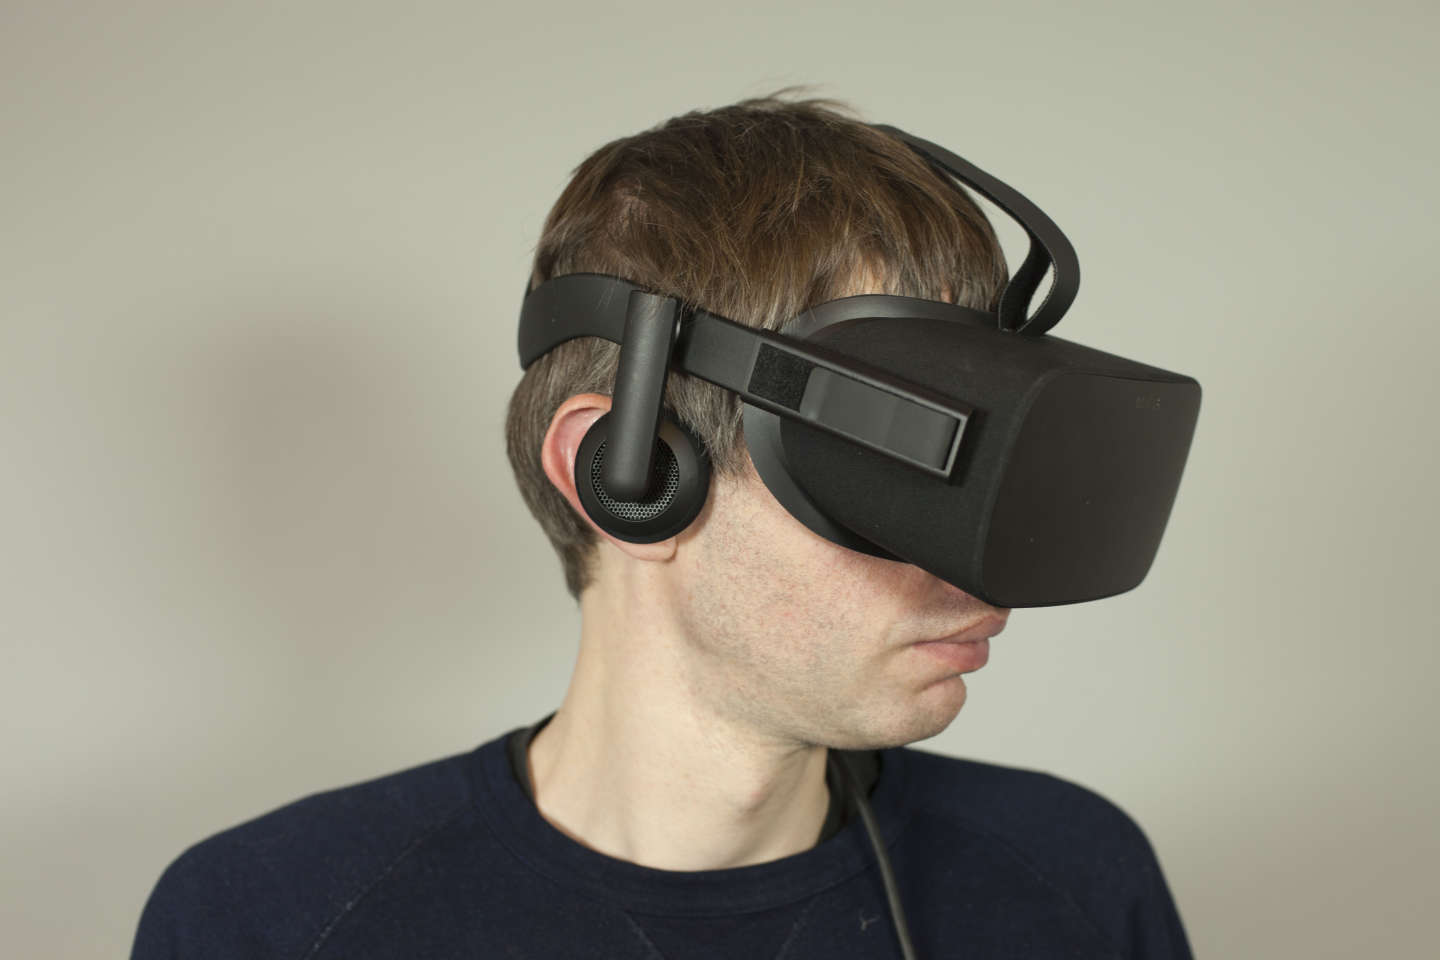 Oculus convicted in rights violation lawsuit